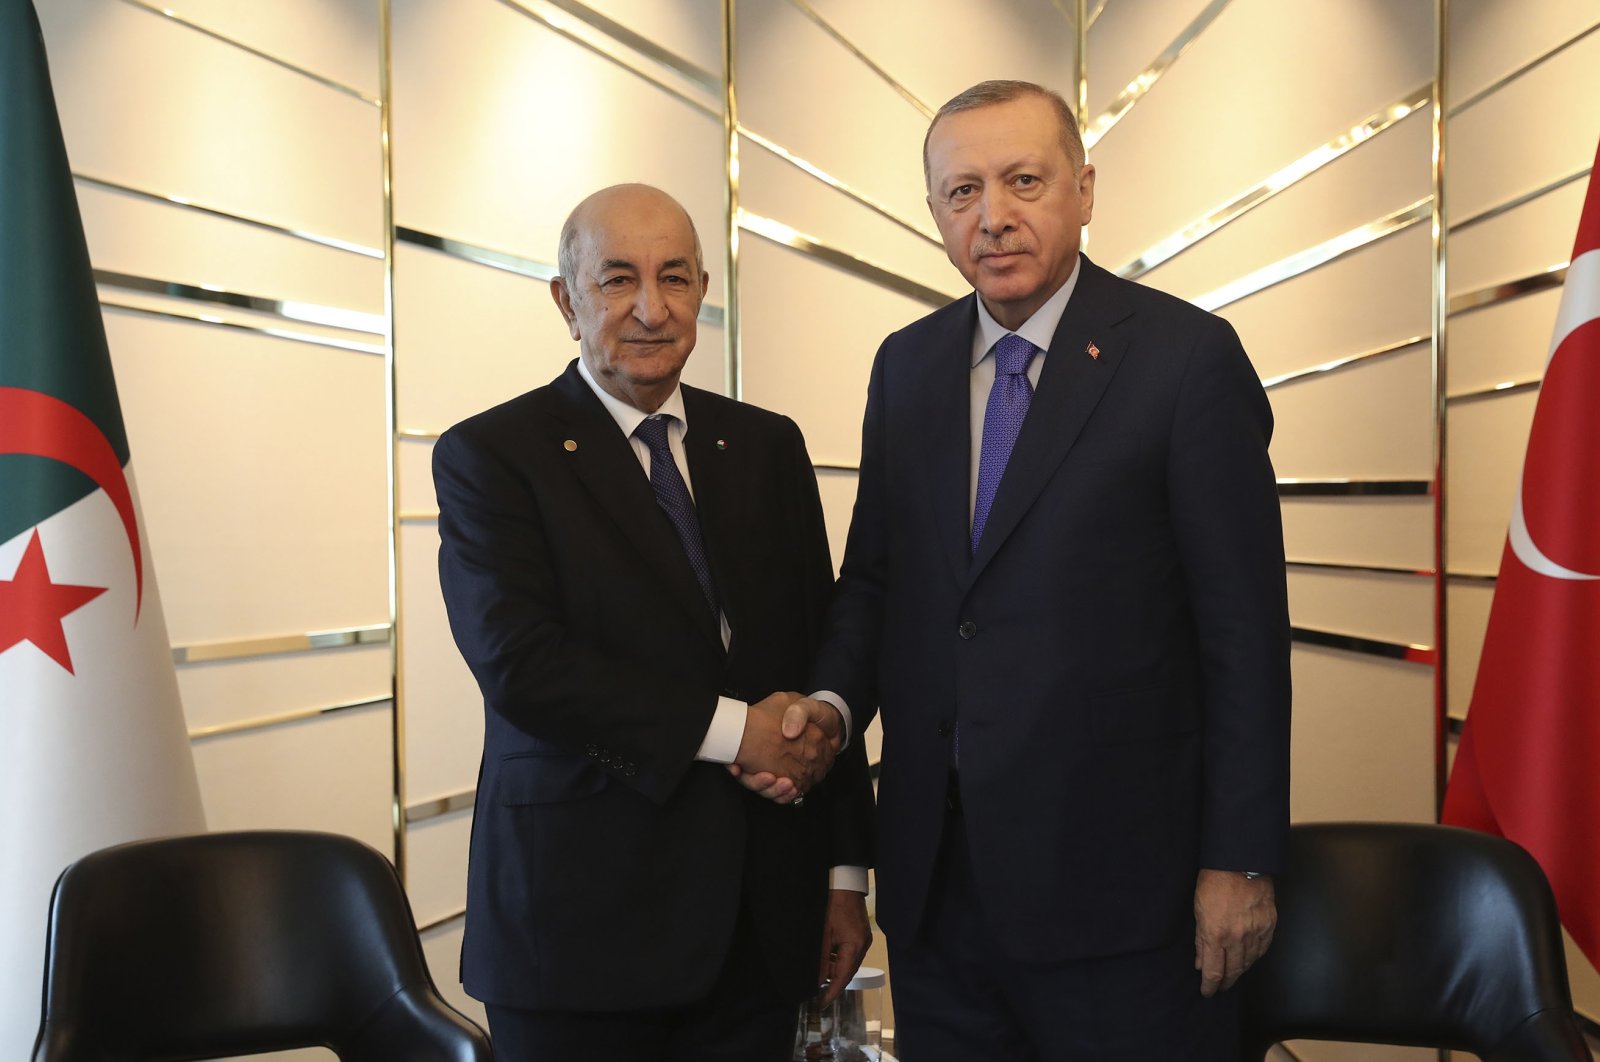 Turkish President Recep Tayyip Erdoğan (R), with Algerian President Abdelmadjid Tebboune during a meeting on the sidelines of the conference on Libya at the Chancellery in Berlin, Jan. 19, 2020. (AP Photo)